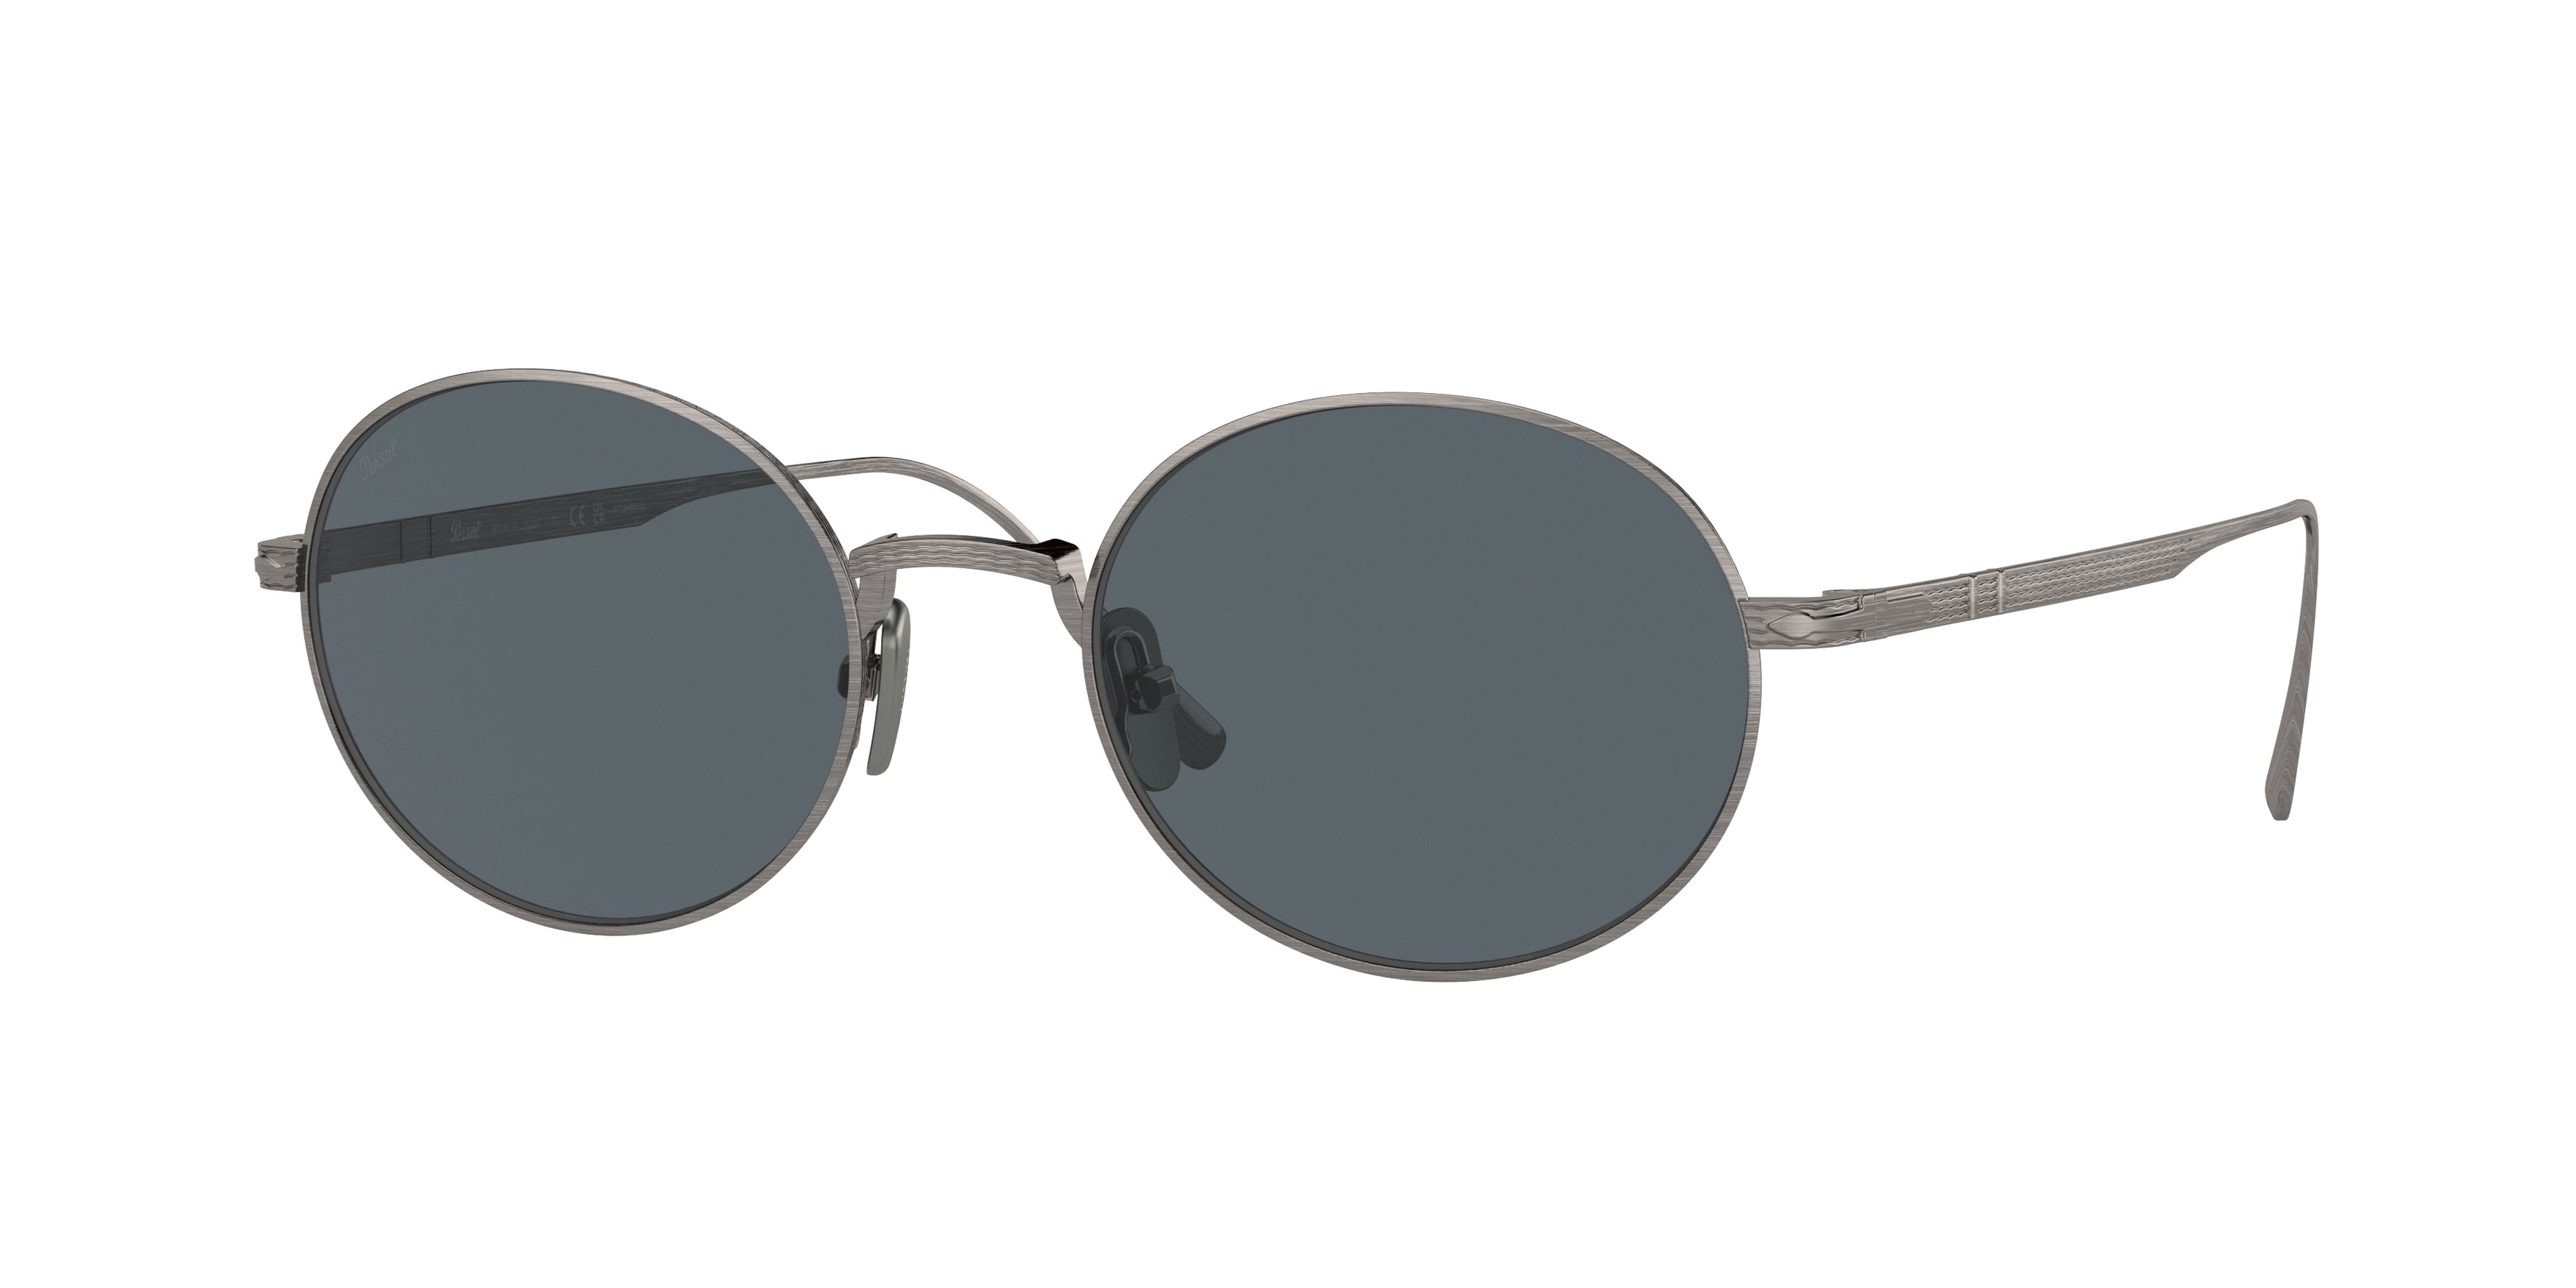 Persol PO5001ST Oval Sunglasses  8001R5-Pewter 51-145-20 - Color Map Grey